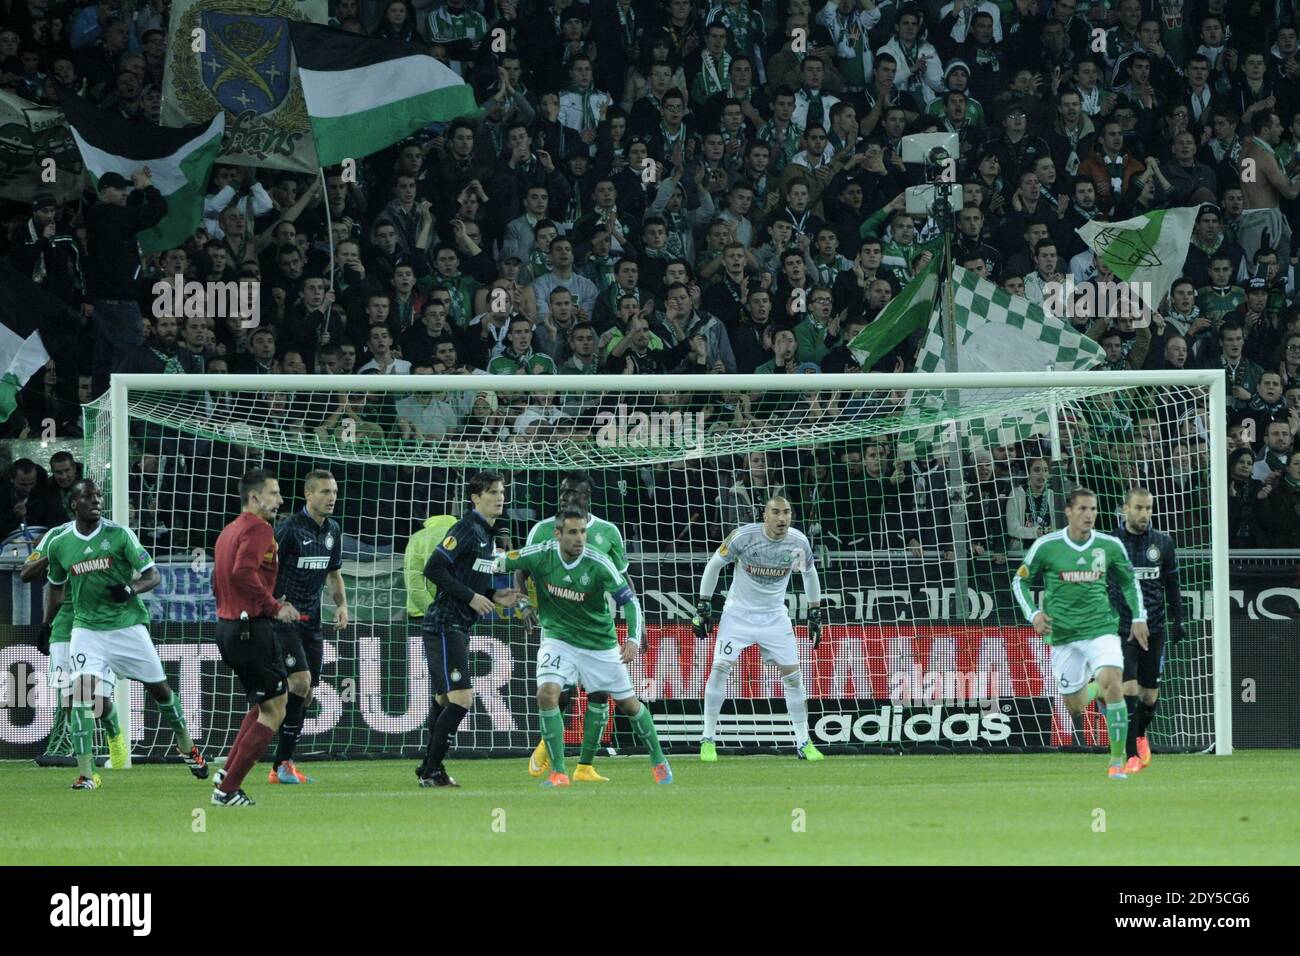 supporters during Europa league soccer match, Saint Etienne vs Inter Milan in Geoffroy Guichard stadium, Saint Etienne, France, on November 6, 2014. Photo by Philipe Montigny/ABACAPRESS.COM Stock Photo